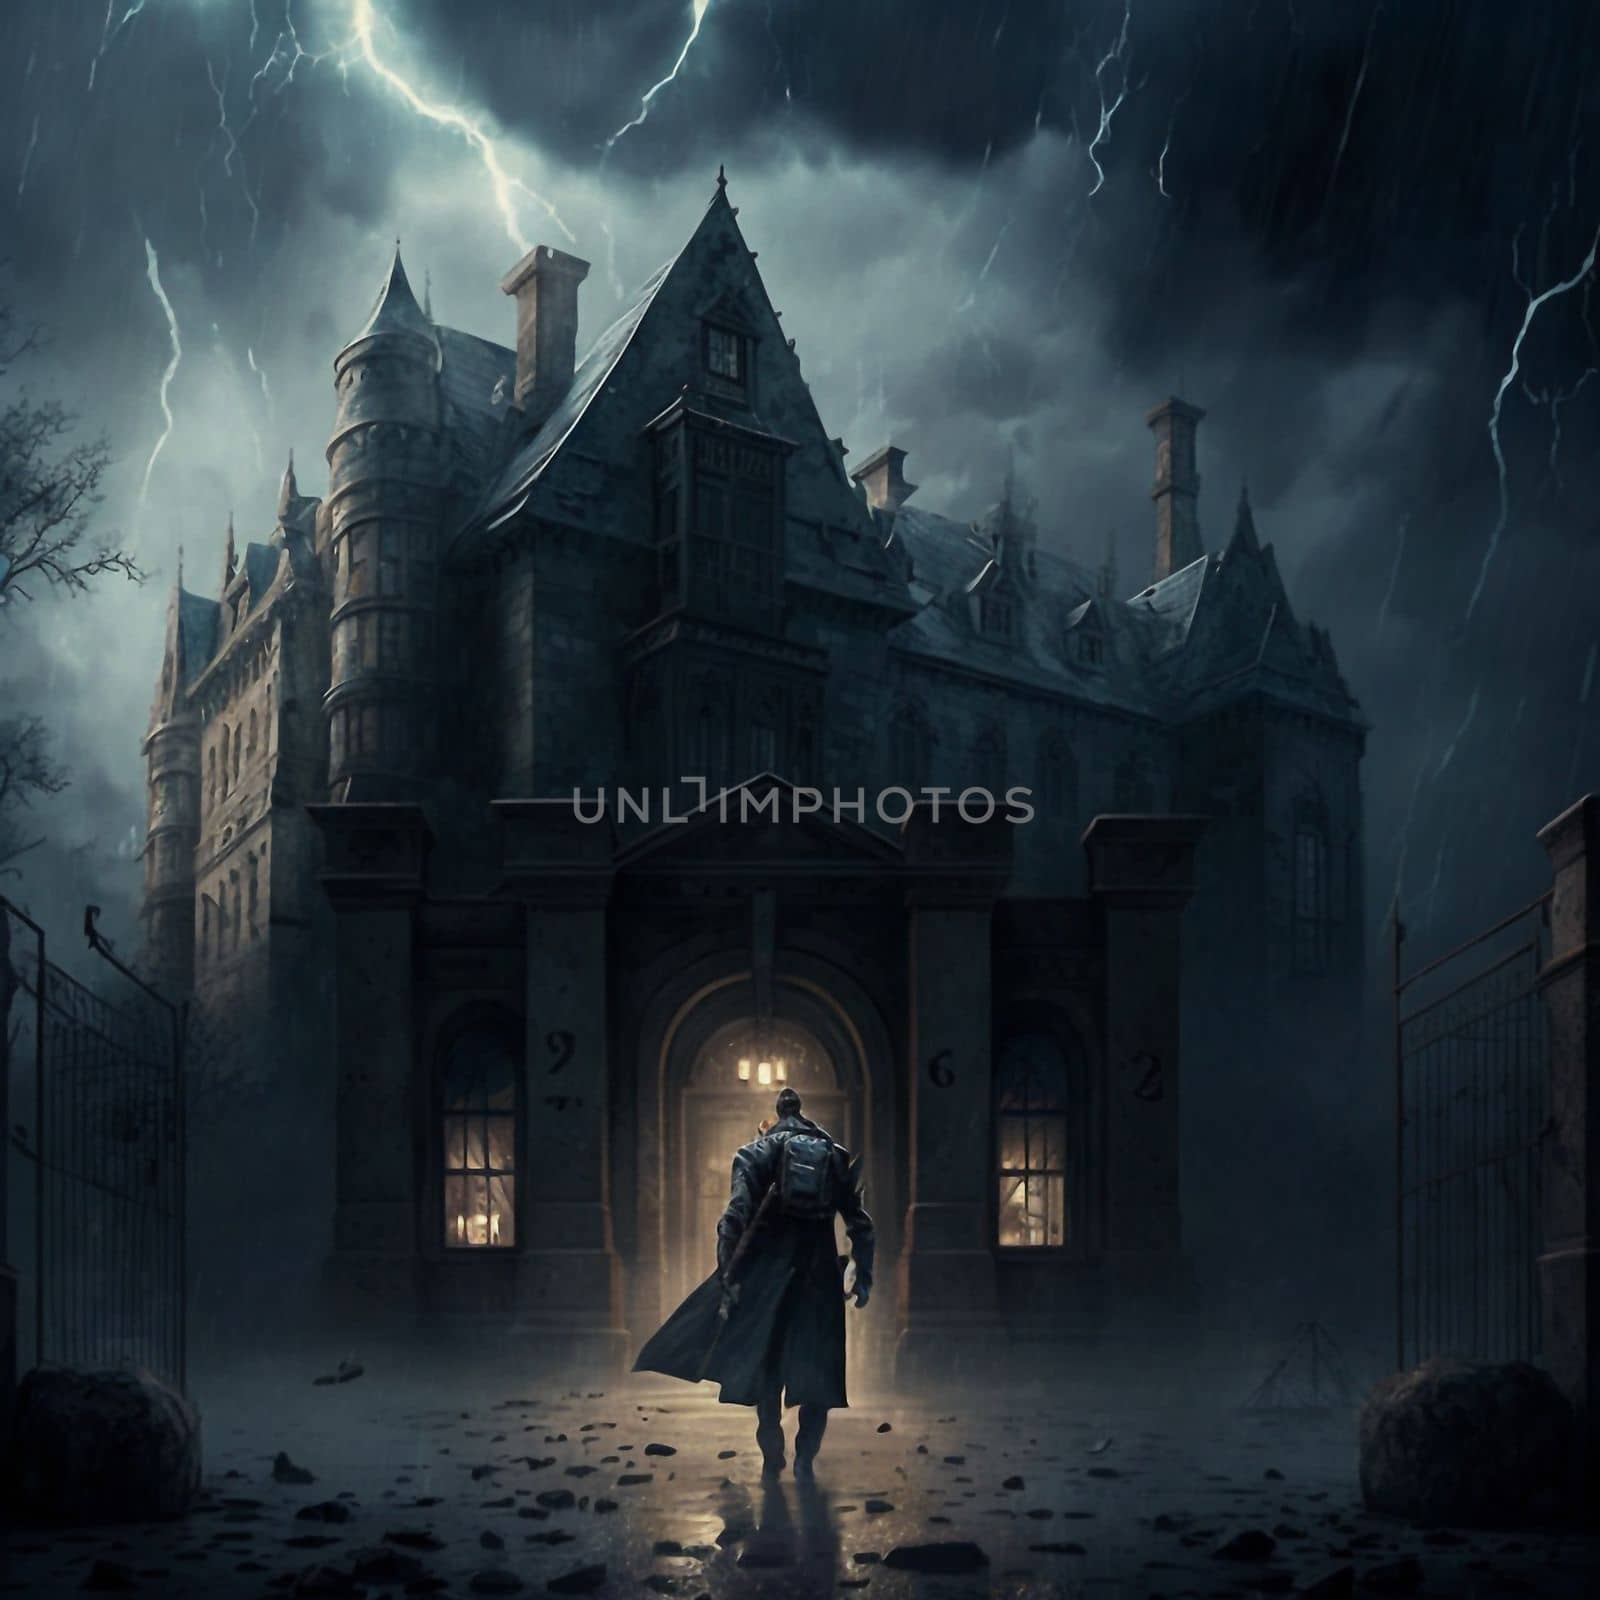 A man walking to a mysterious old castle on a stormy night. High quality illustration